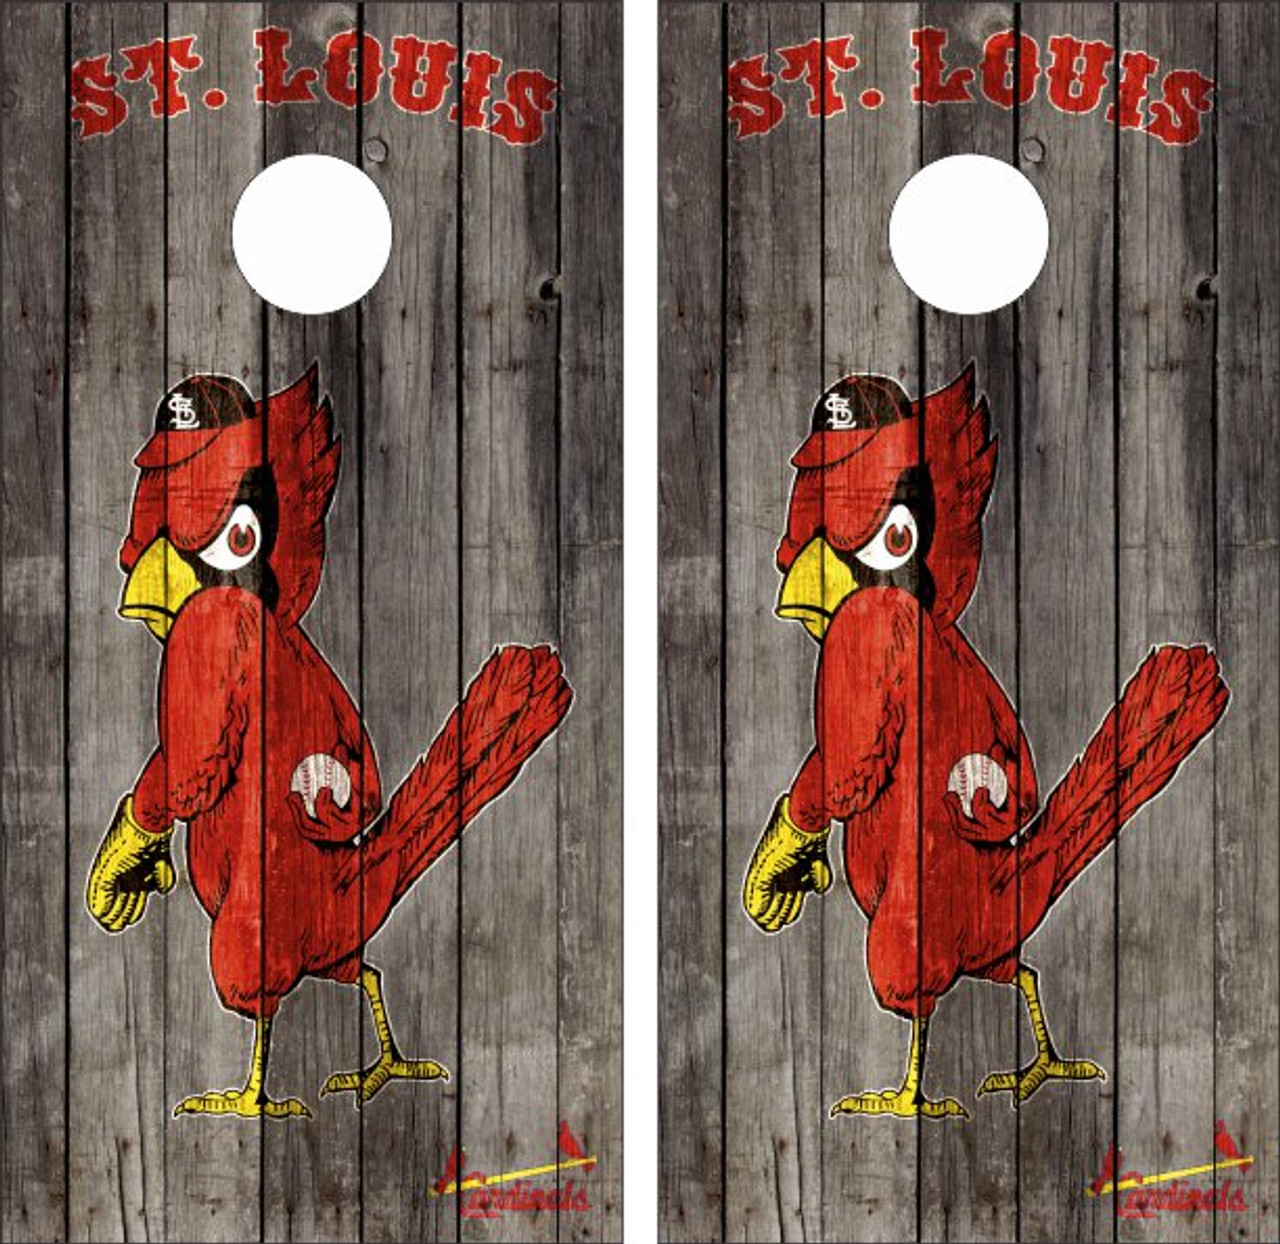 St. Louis Cardinals and Blues Cornhole Set with Bags - Custom